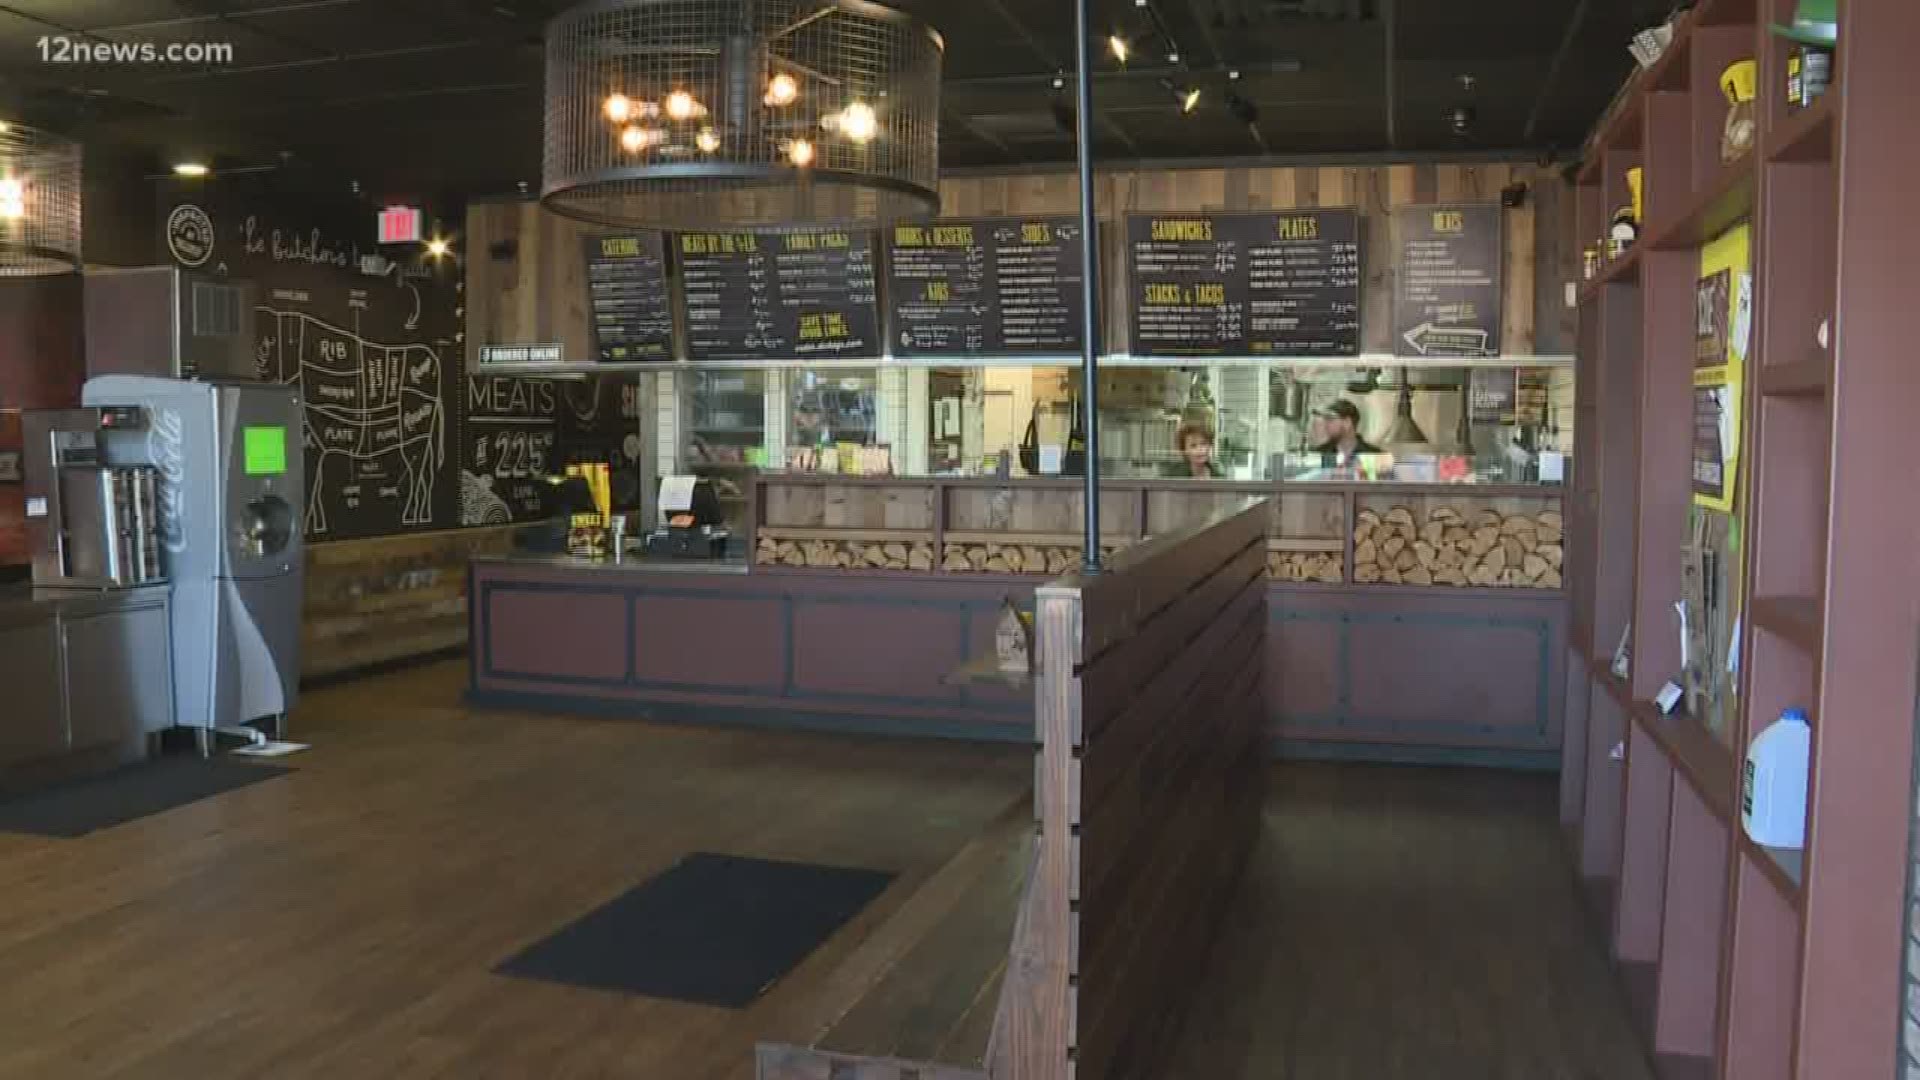 Dickey's Barbecue is handing out 100,000 free sandwich vouchers to first responders. Rachel Cole has the story.